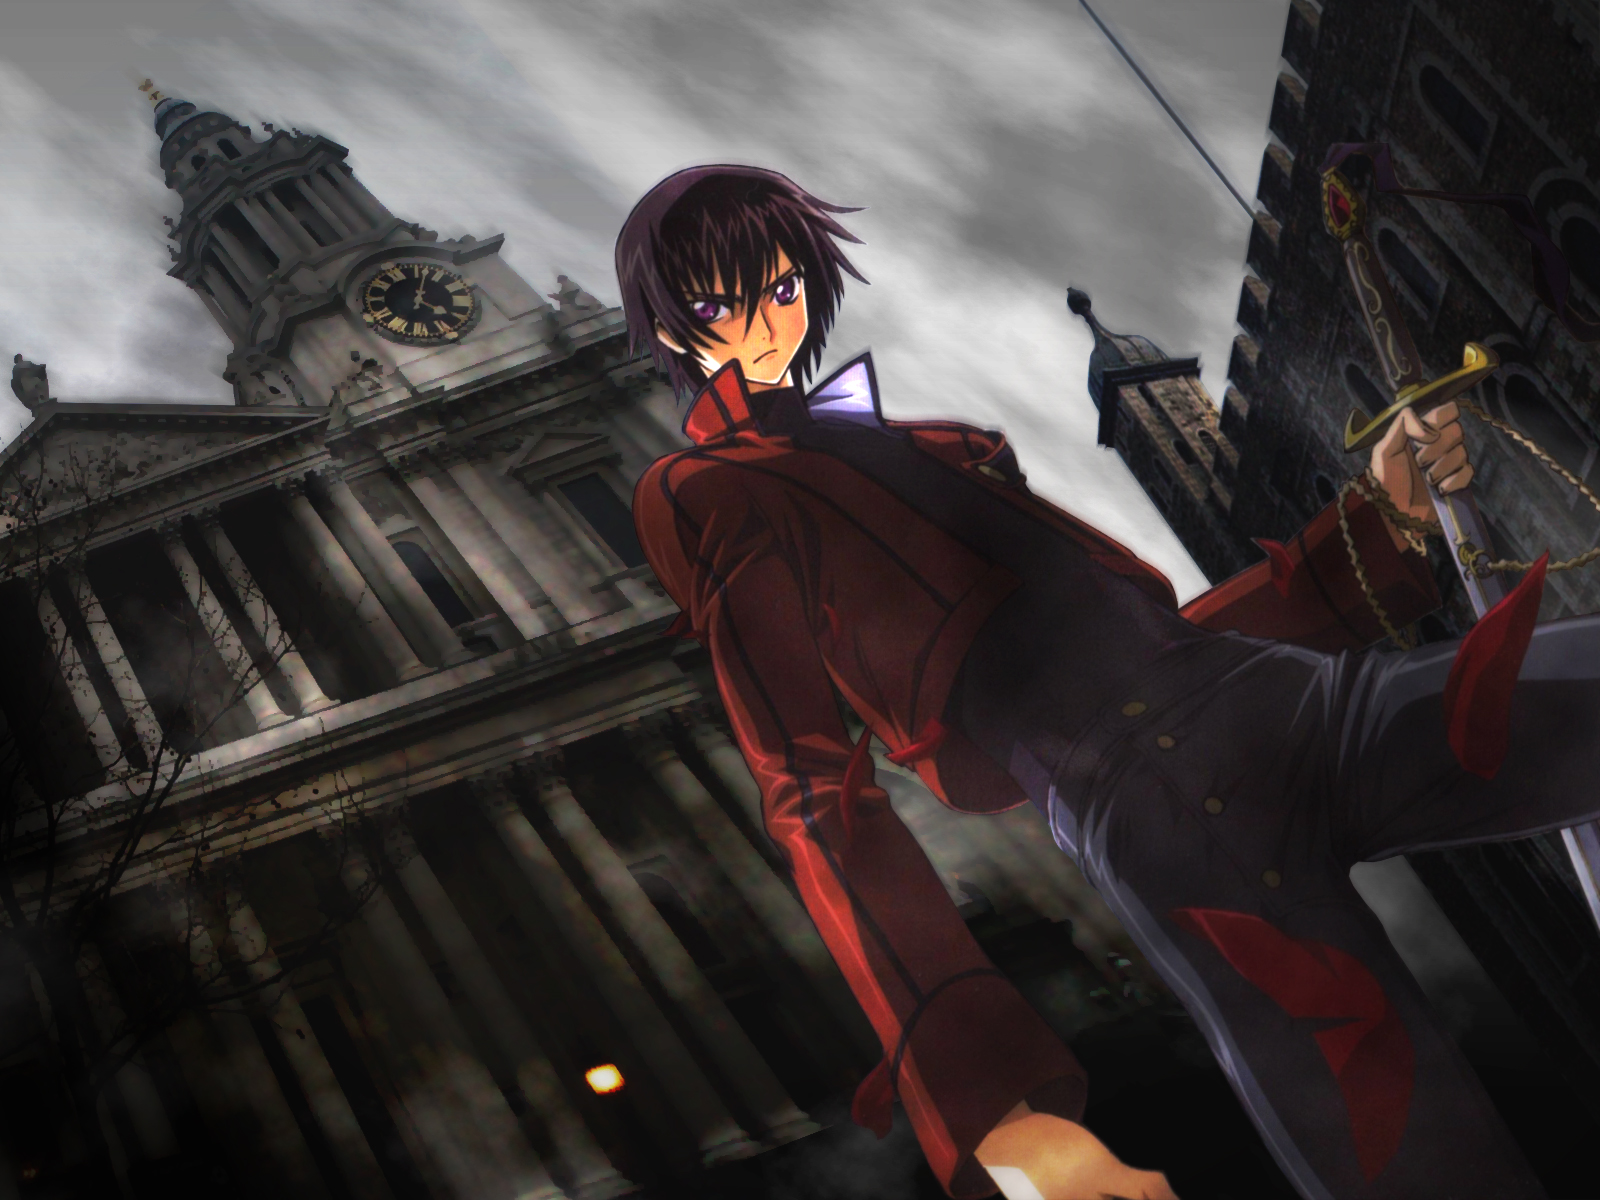 Close-up of Lelouch Lamperouge, a character from the HD desktop wallpaper.